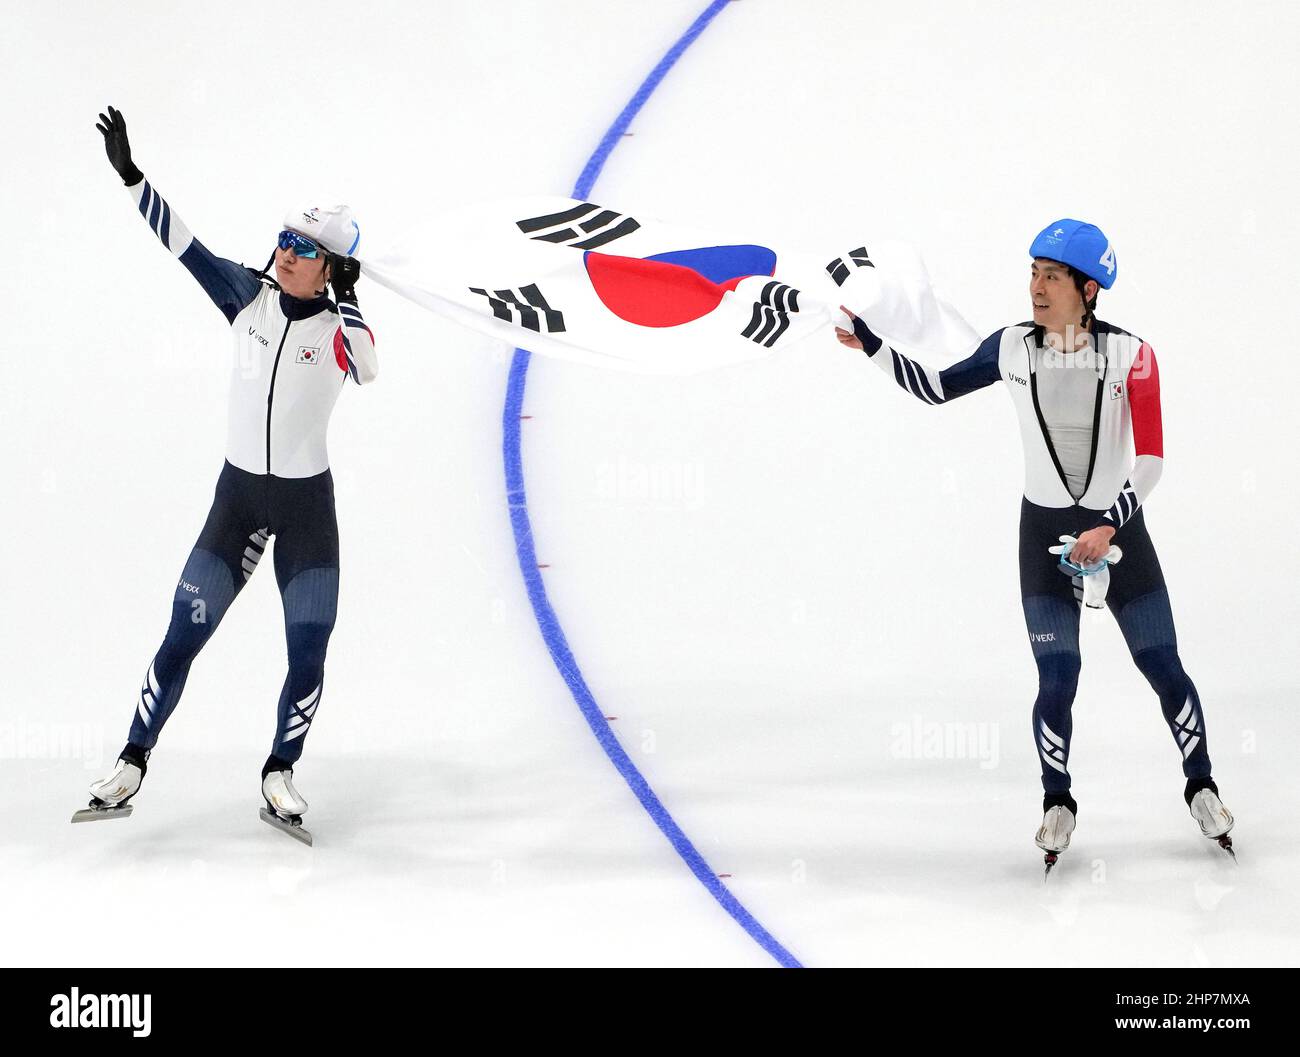 Beijing, China. 19th Feb, 2022. Chung Jae Won (L) and Lee Seung Hoon of South Korea celebrate after the speed skating men's mass start final of Beijing 2022 Winter Olympics at the National Speed Skating Oval in Beijing, capital of China, Feb. 19, 2022. Credit: Li An/Xinhua/Alamy Live News Stock Photo